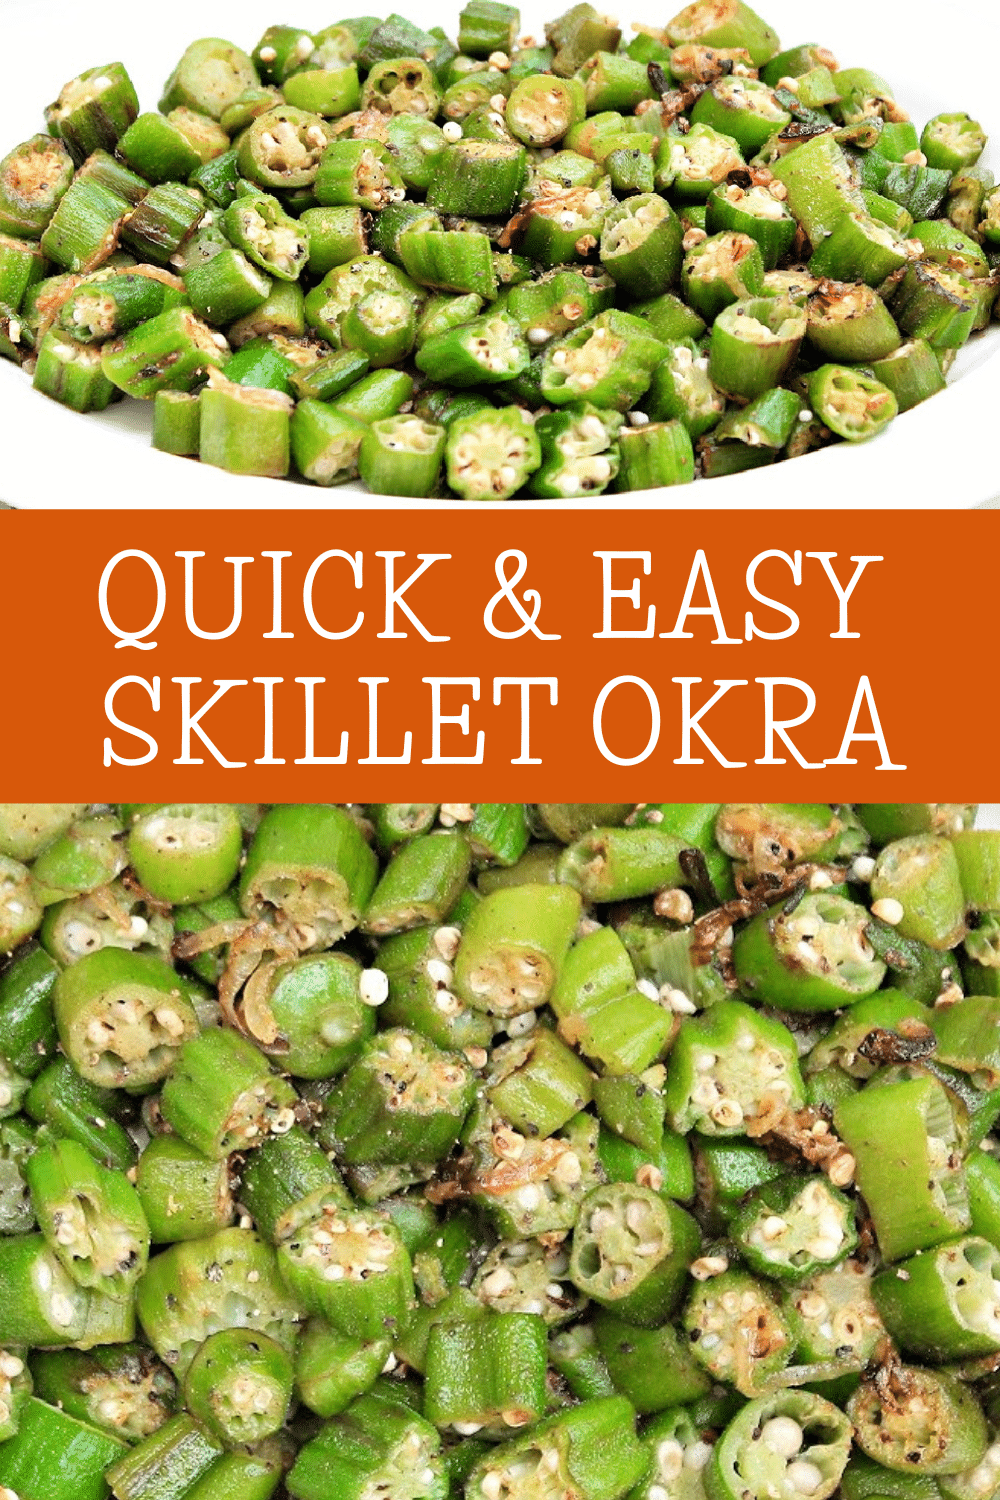 Skillet Okra ~ Easy recipe for fresh or frozen okra! Few ingredients and minimal prep time - this simple dish is ready in minutes! via @thiswifecooks